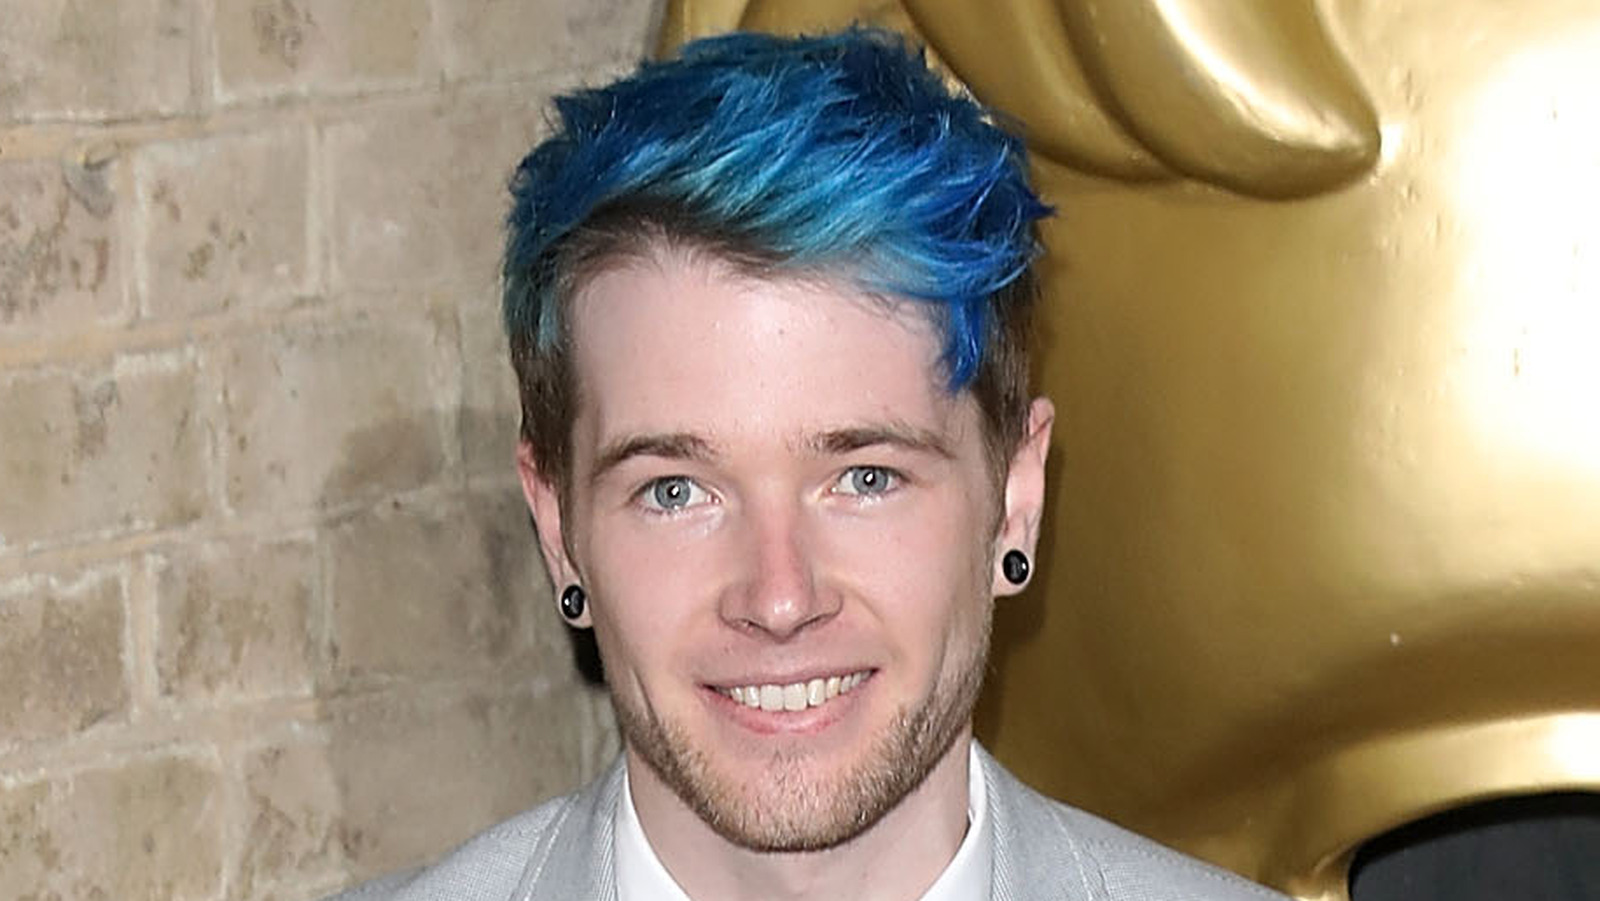 2. How to Achieve Dantdm's Iconic Blue Hair Look - wide 3